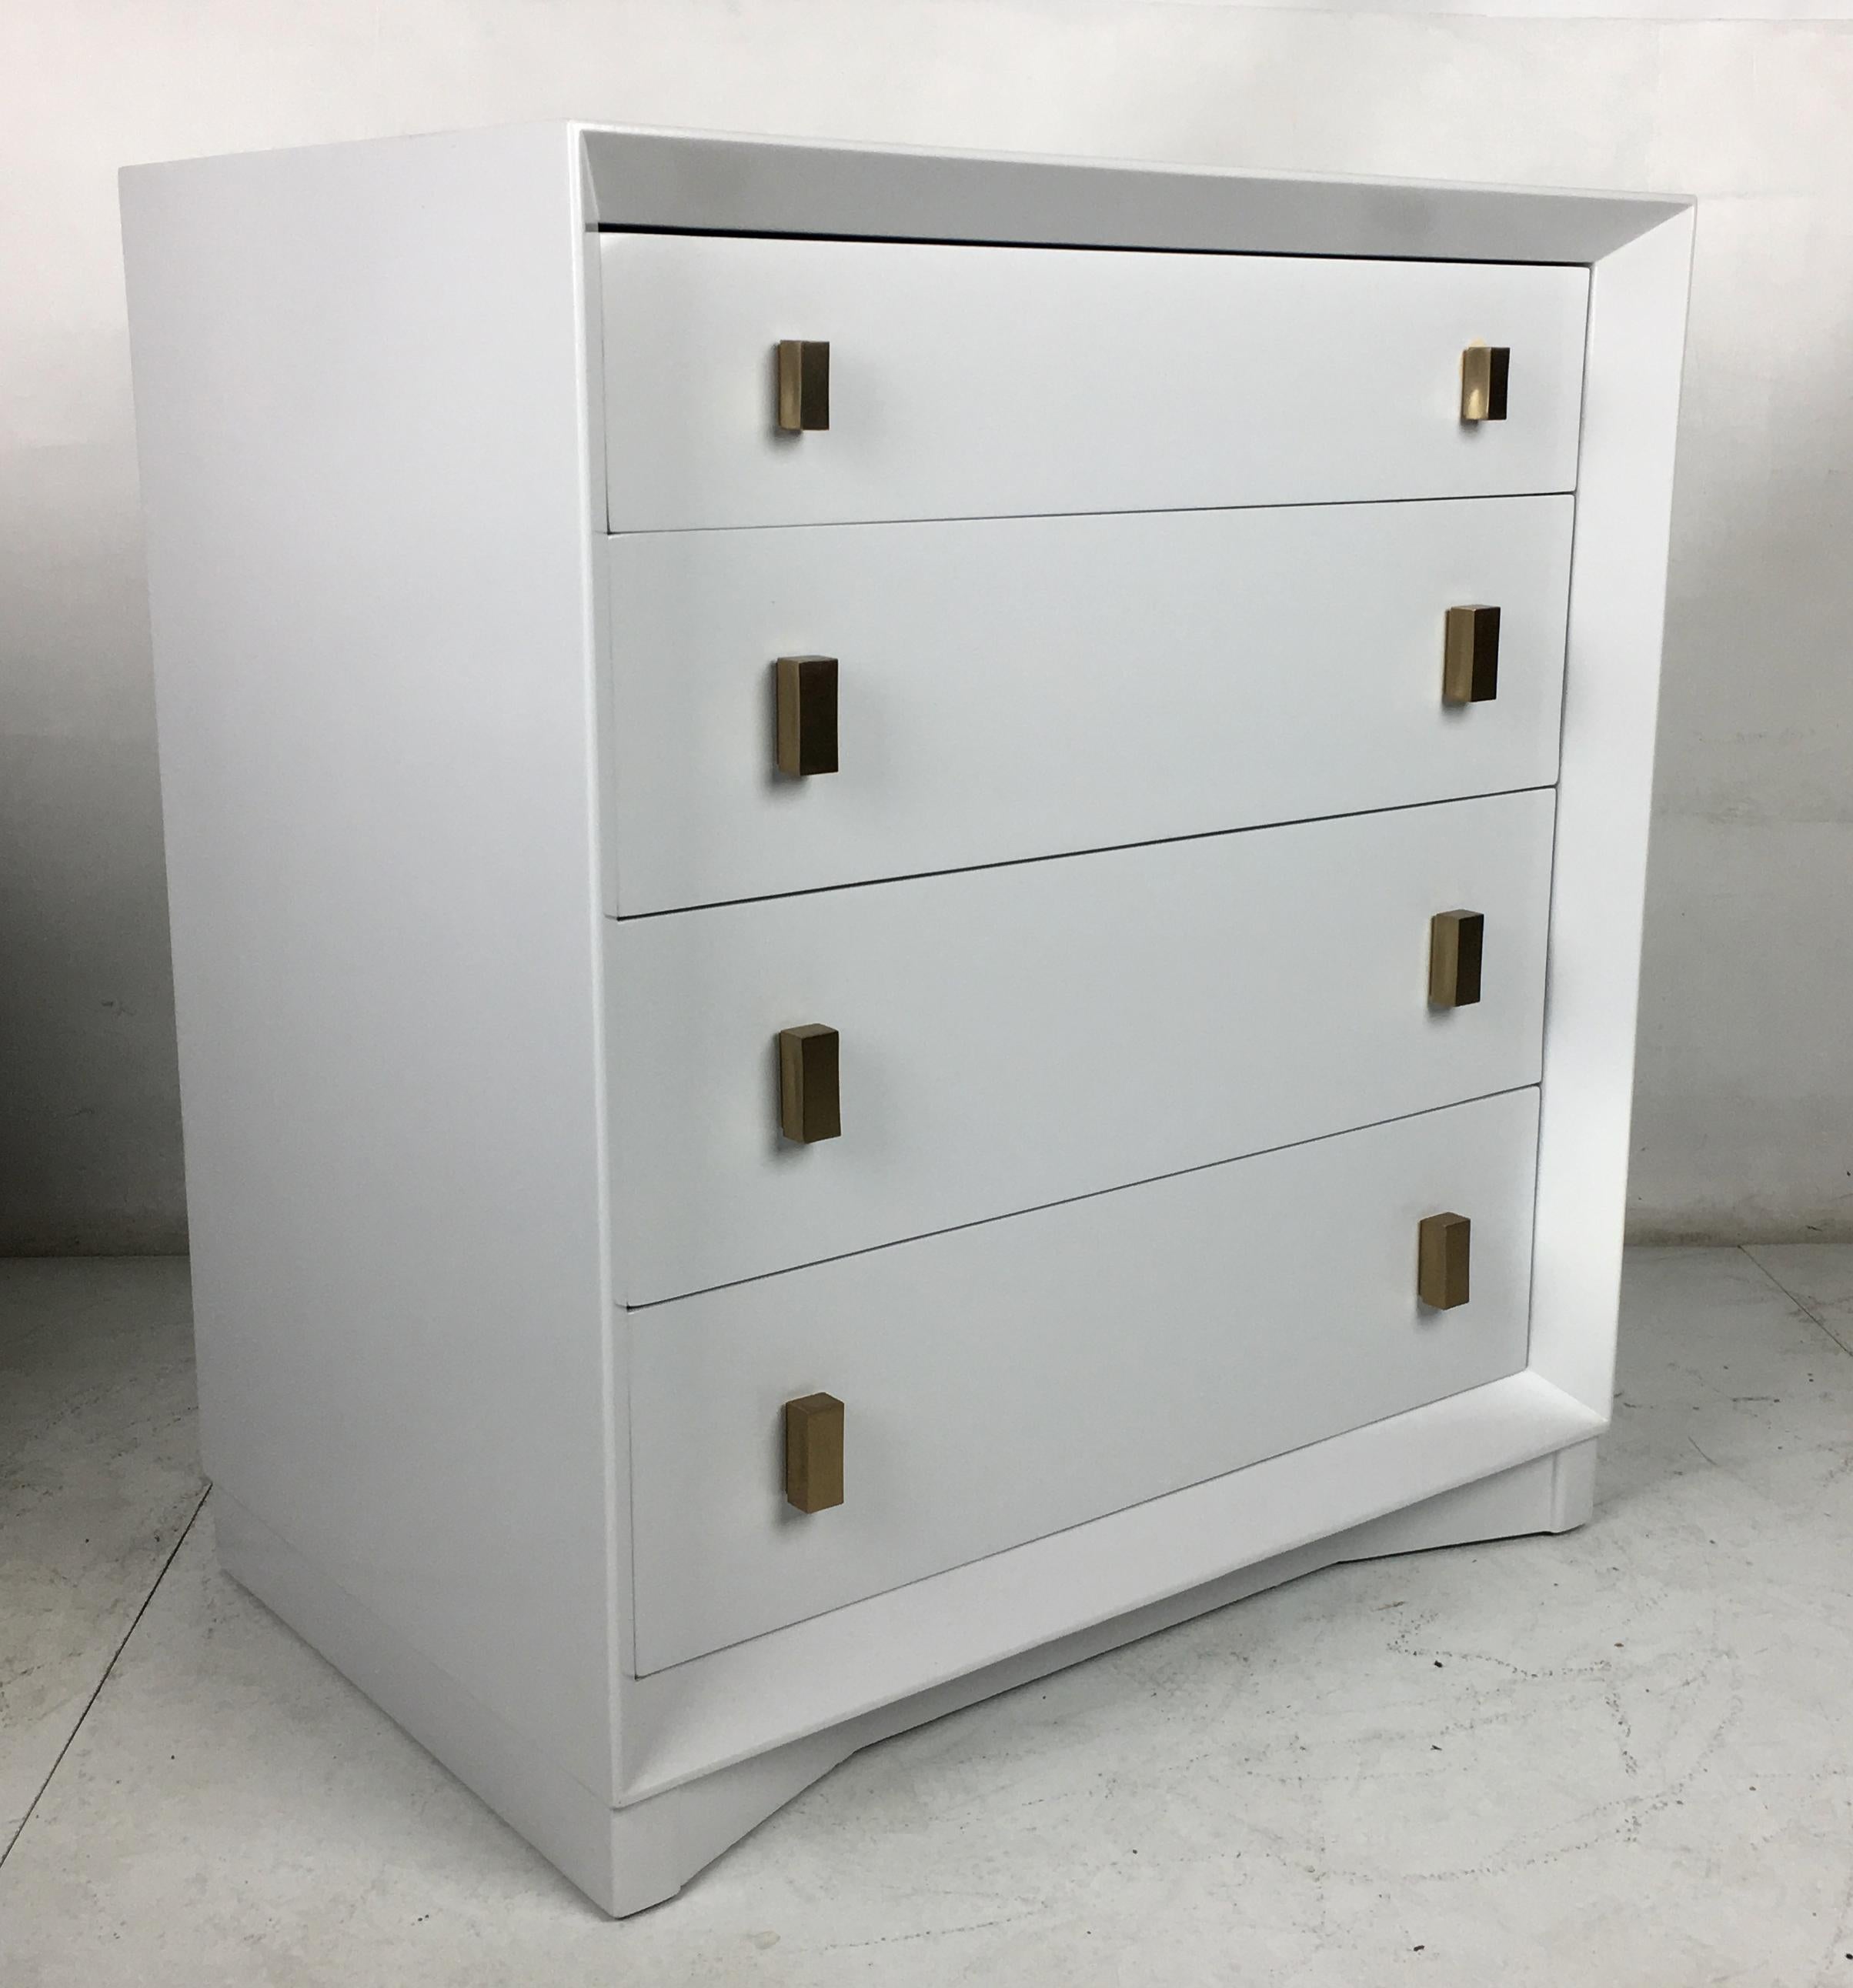 Handsome pale grey commode/chest of drawers by Plymouth Furniture for John Stuart NY. The chest has been meticulously restored and freshly lacquered in a grey/off-white.